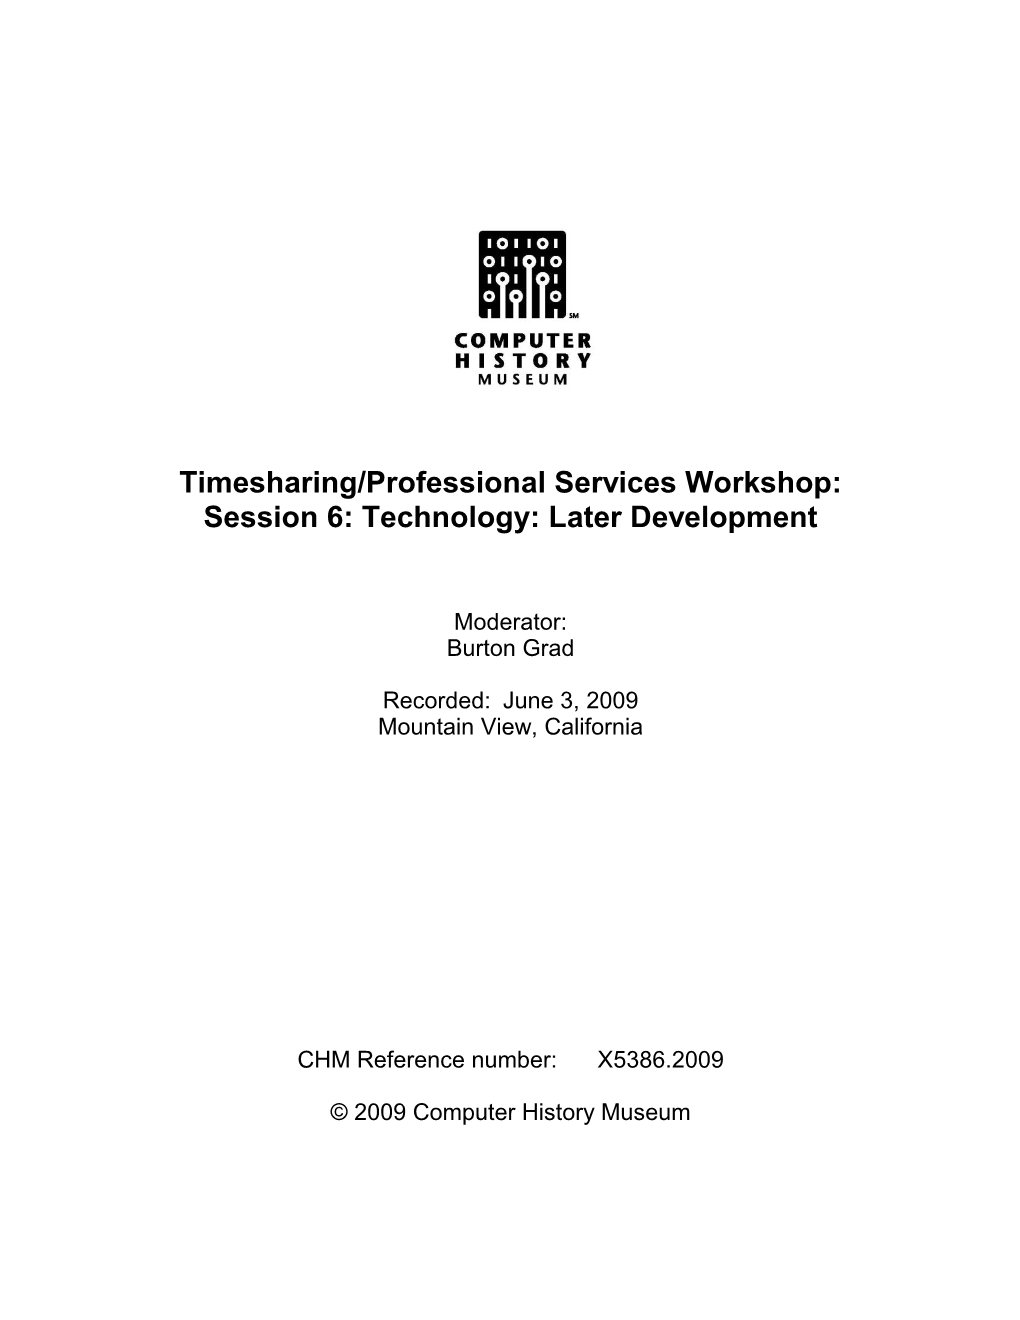 Timesharing and Remote Processing Services Meeting Session #6